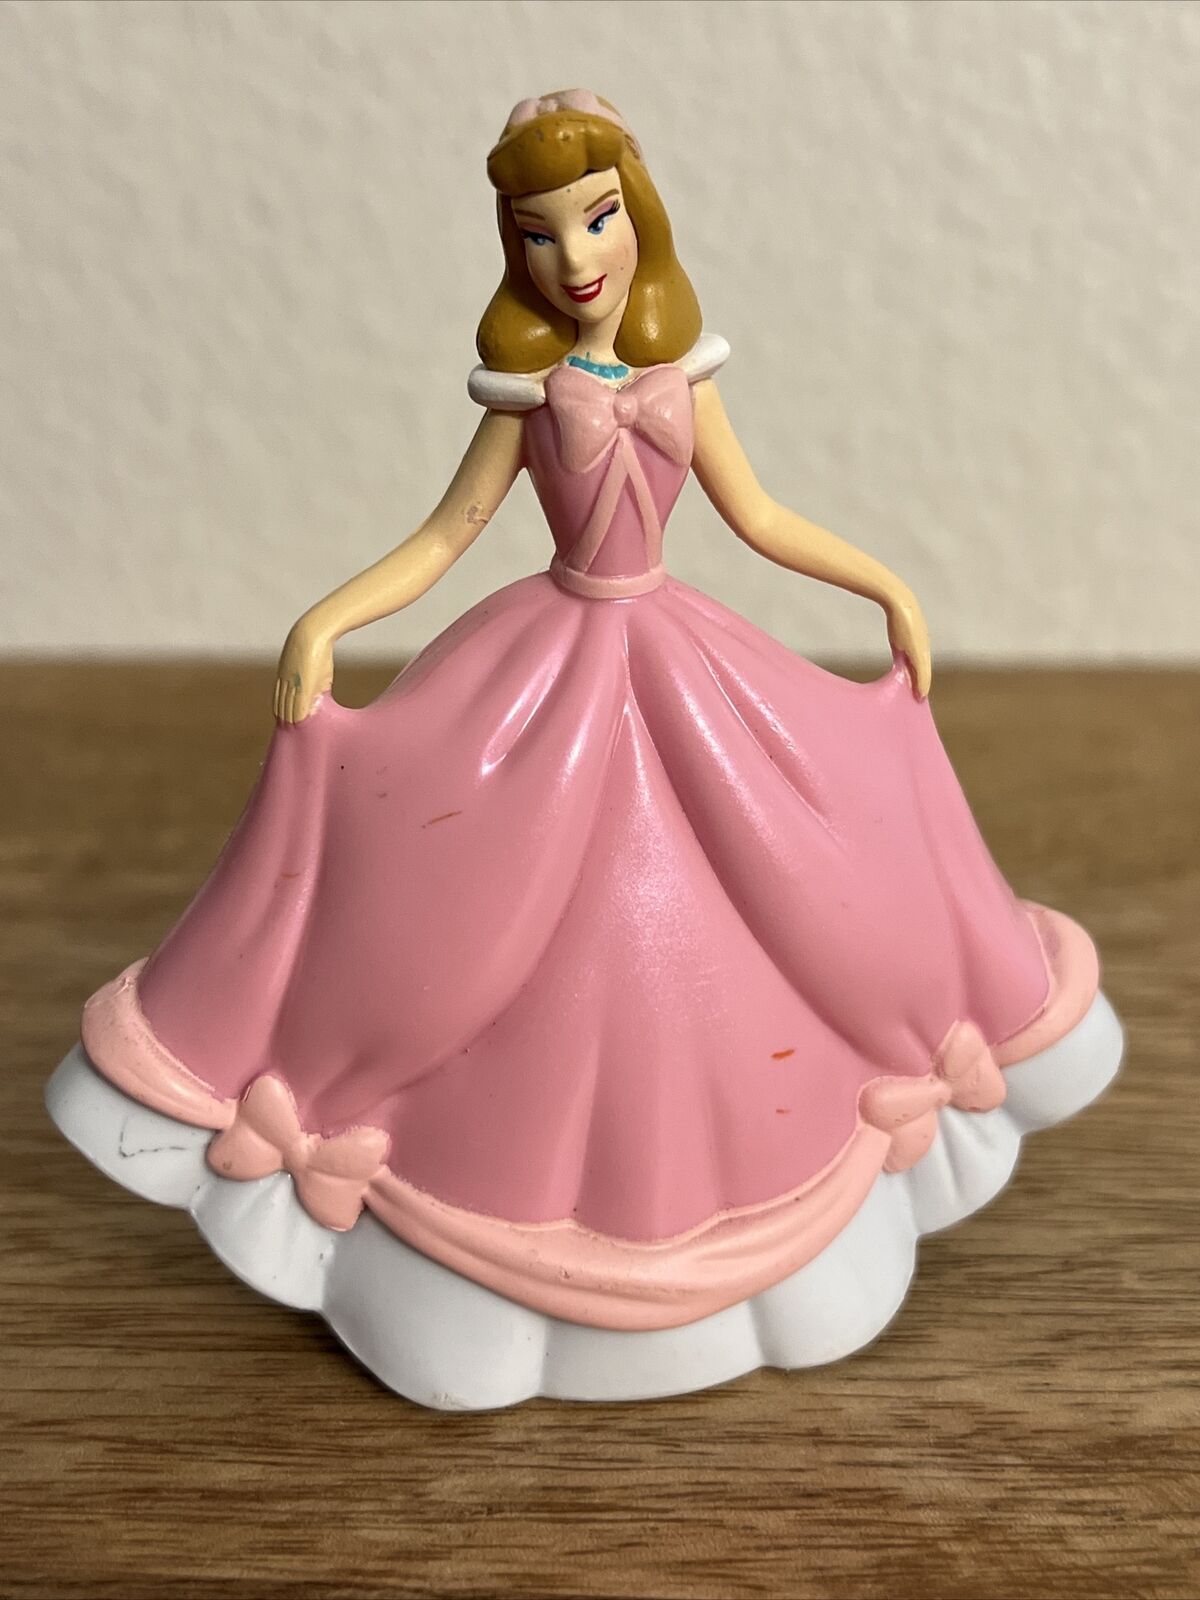 CINDERELLA IN PINK DRESS DISNEY 4” ACTION FIGURE SOLID PVC RARE TOY